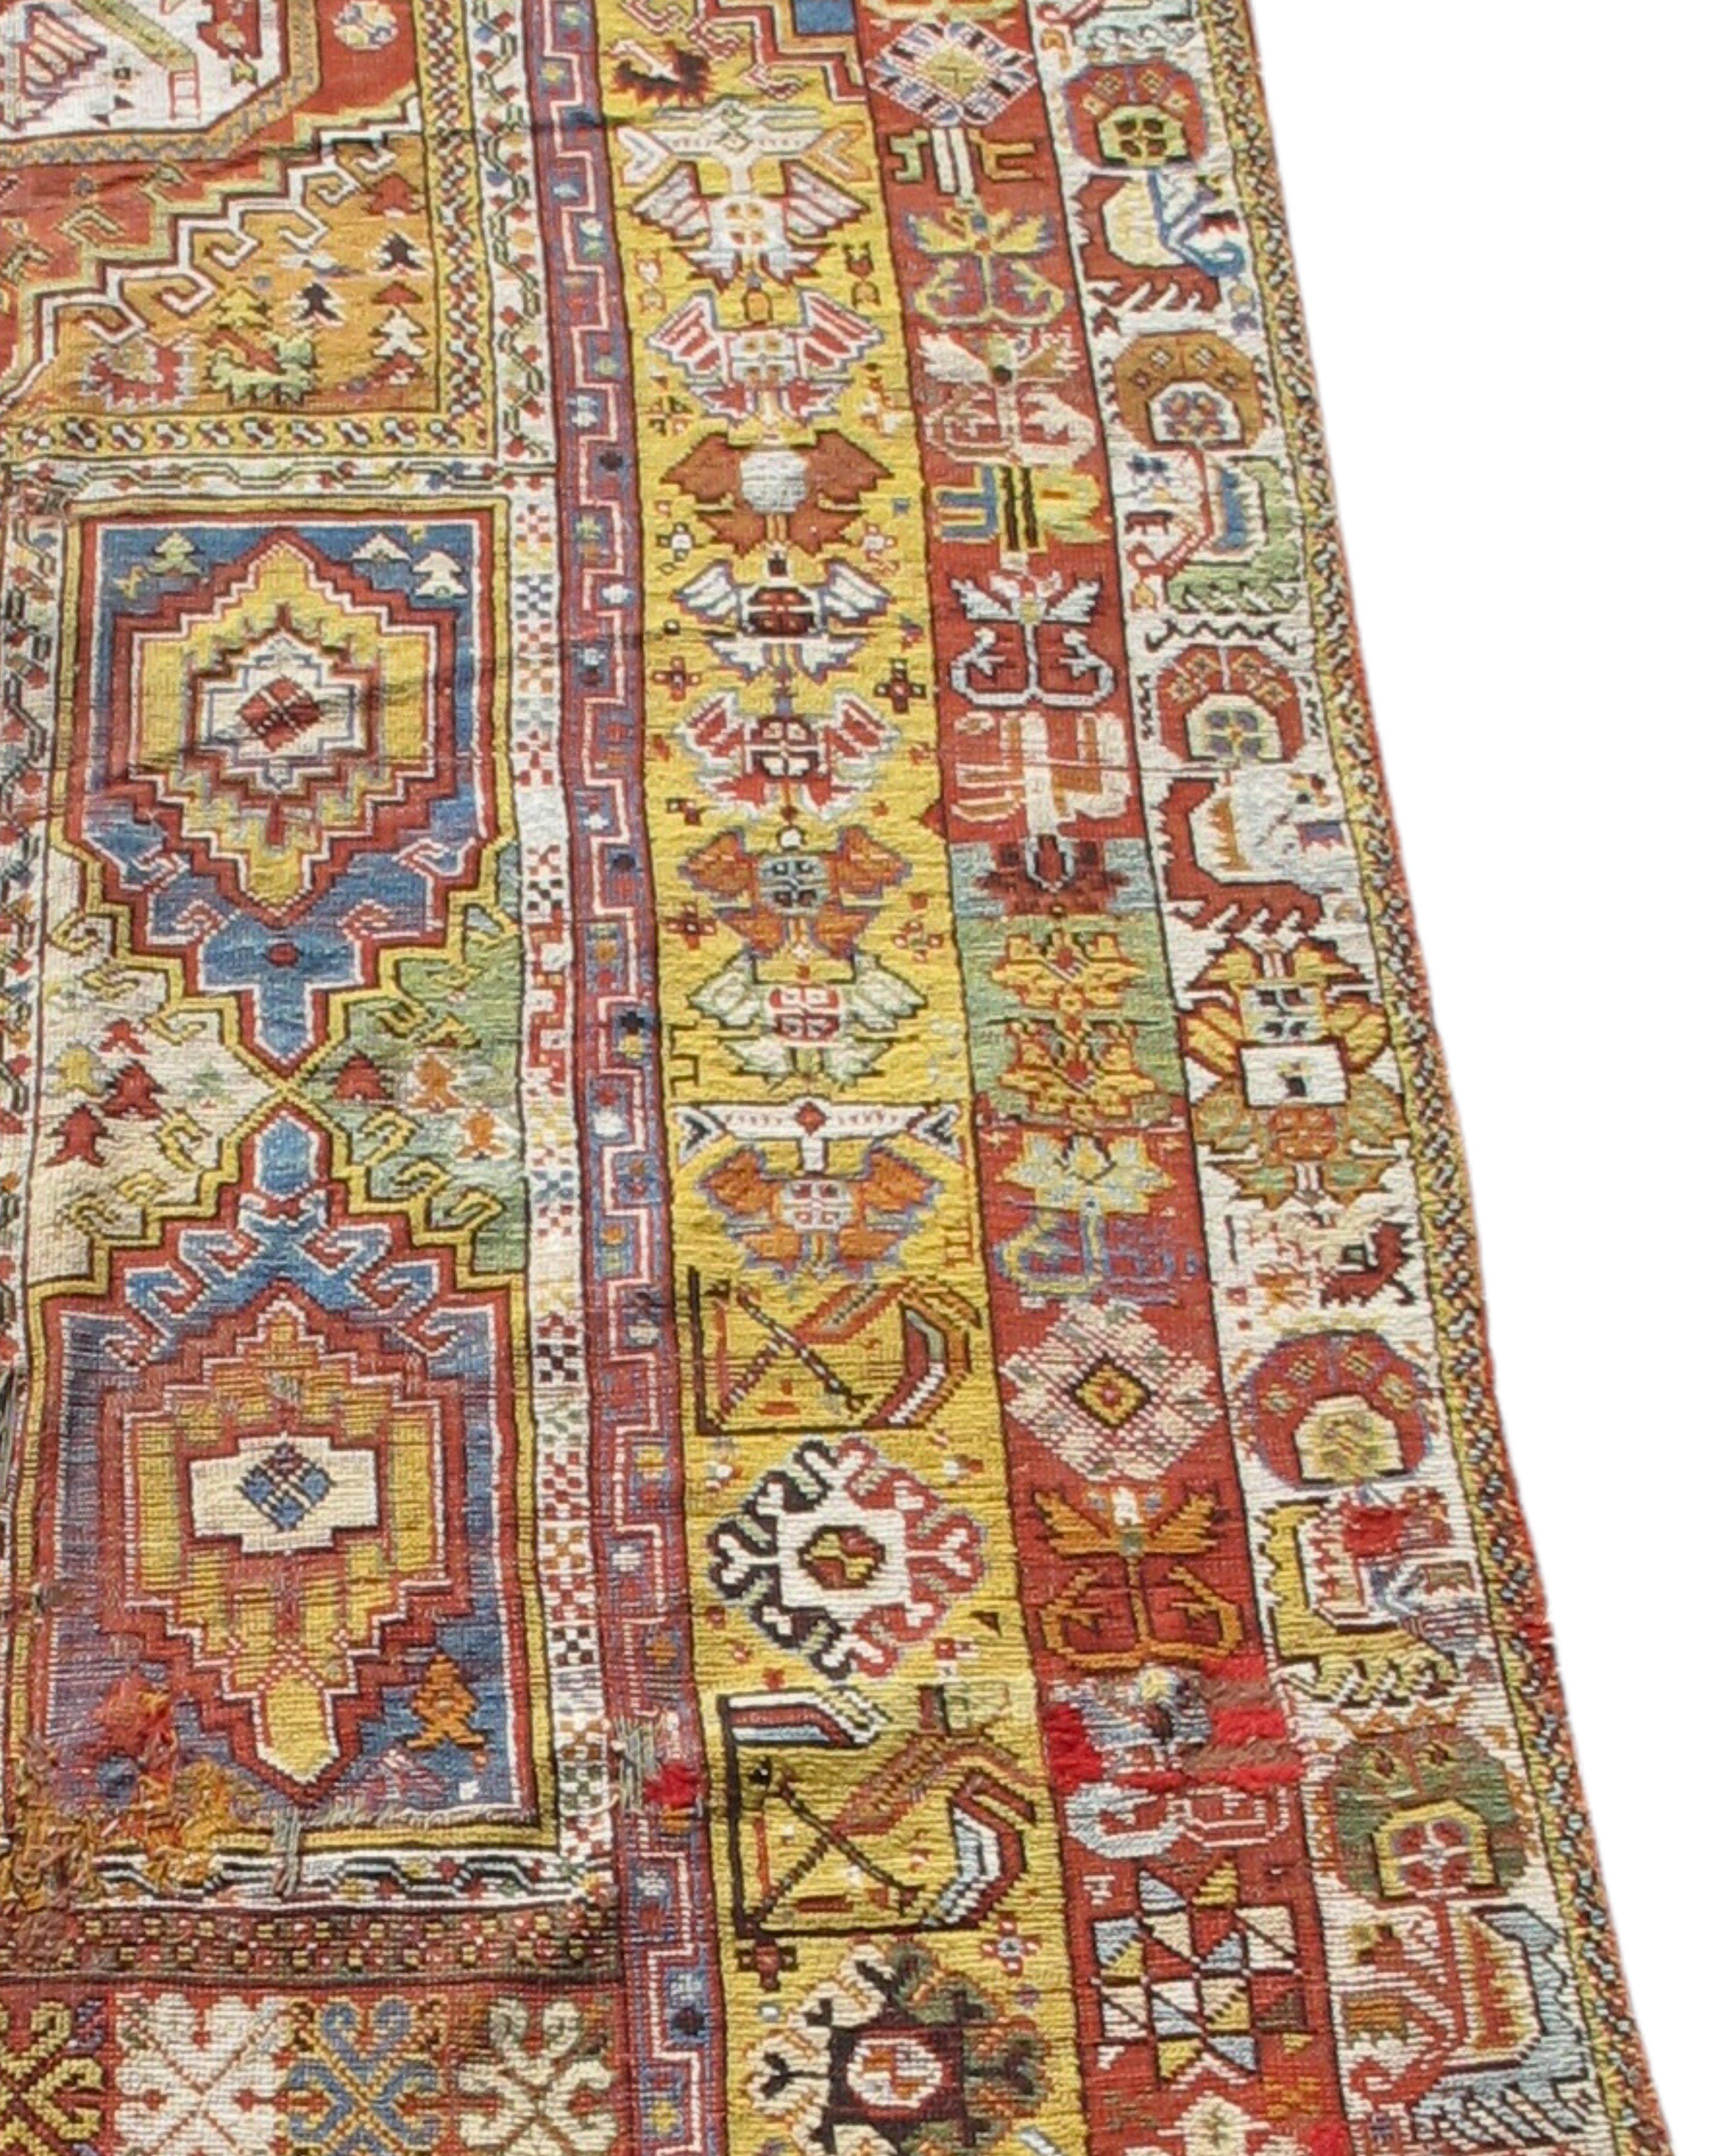 Antique Moroccan Rabat Long Rug, 19th Century

Moroccan carpet weaving has a long but ambiguous history. In comparison to examples from the 20th century, few 19th-Century or earlier Moroccan pieces survive. Rabat seems to have been a major center